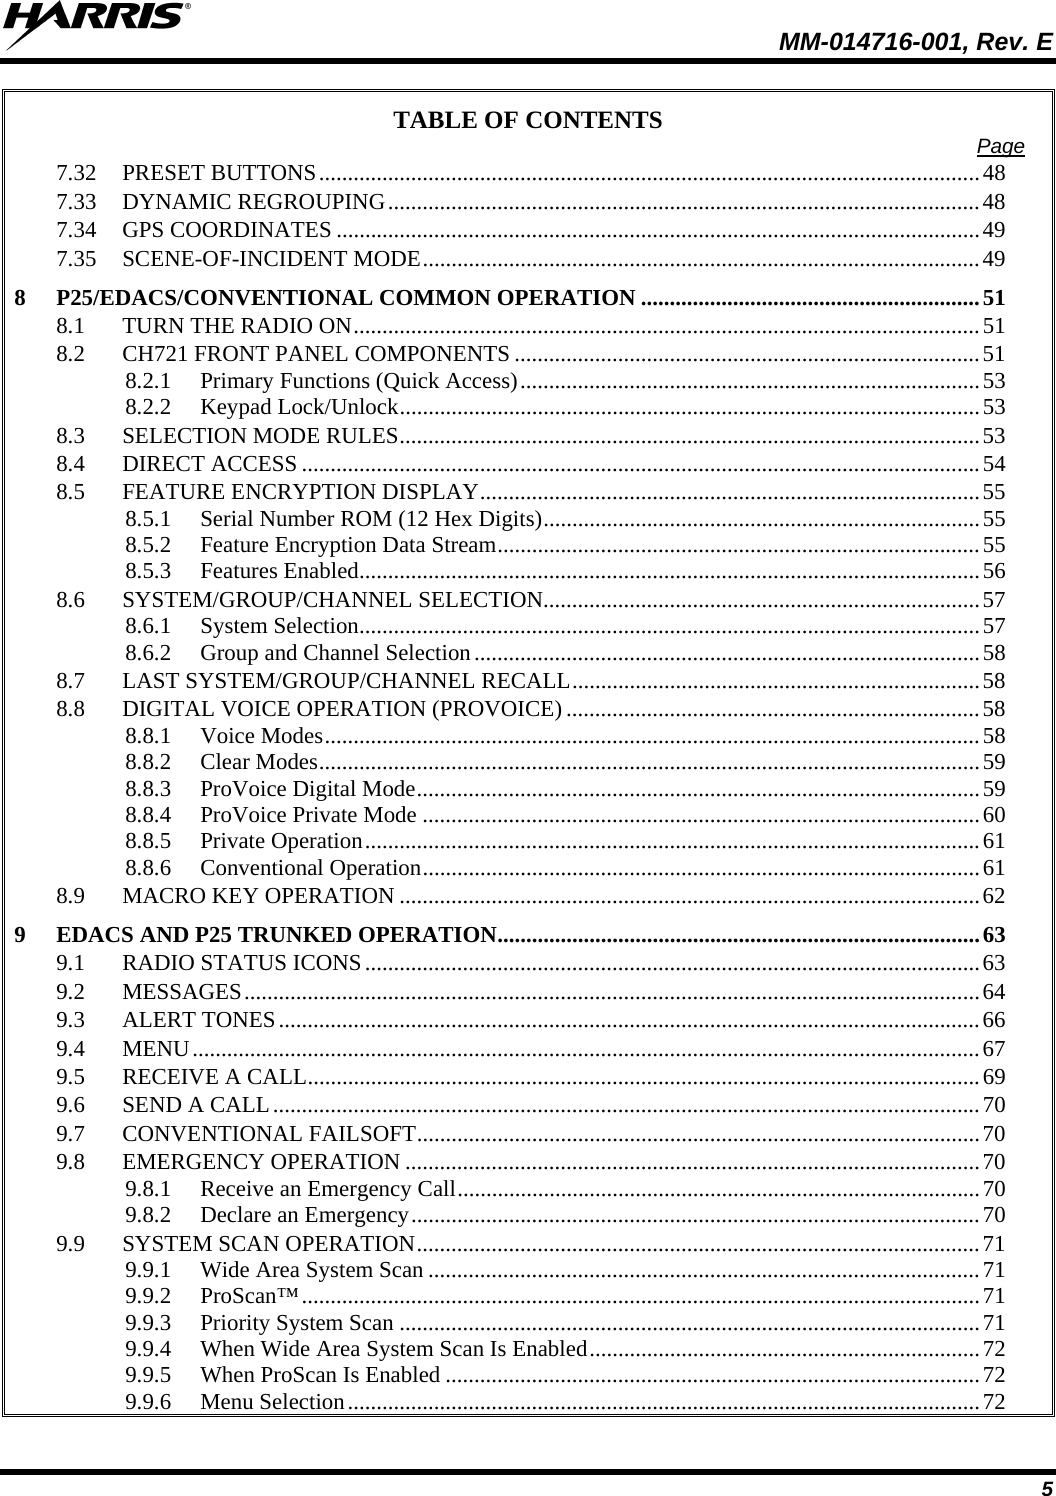  MM-014716-001, Rev. E 5 TABLE OF CONTENTS  Page 7.32 PRESET BUTTONS...................................................................................................................48 7.33 DYNAMIC REGROUPING.......................................................................................................48 7.34 GPS COORDINATES ................................................................................................................49 7.35 SCENE-OF-INCIDENT MODE.................................................................................................49 8 P25/EDACS/CONVENTIONAL COMMON OPERATION ...........................................................51 8.1 TURN THE RADIO ON.............................................................................................................51 8.2 CH721 FRONT PANEL COMPONENTS .................................................................................51 8.2.1 Primary Functions (Quick Access)................................................................................53 8.2.2 Keypad Lock/Unlock.....................................................................................................53 8.3 SELECTION MODE RULES.....................................................................................................53 8.4 DIRECT ACCESS ......................................................................................................................54 8.5 FEATURE ENCRYPTION DISPLAY.......................................................................................55 8.5.1 Serial Number ROM (12 Hex Digits)............................................................................55 8.5.2 Feature Encryption Data Stream....................................................................................55 8.5.3 Features Enabled............................................................................................................56 8.6 SYSTEM/GROUP/CHANNEL SELECTION............................................................................57 8.6.1 System Selection............................................................................................................57 8.6.2 Group and Channel Selection........................................................................................58 8.7 LAST SYSTEM/GROUP/CHANNEL RECALL.......................................................................58 8.8 DIGITAL VOICE OPERATION (PROVOICE) ........................................................................58 8.8.1 Voice Modes..................................................................................................................58 8.8.2 Clear Modes...................................................................................................................59 8.8.3 ProVoice Digital Mode..................................................................................................59 8.8.4 ProVoice Private Mode .................................................................................................60 8.8.5 Private Operation...........................................................................................................61 8.8.6 Conventional Operation.................................................................................................61 8.9 MACRO KEY OPERATION .....................................................................................................62 9 EDACS AND P25 TRUNKED OPERATION....................................................................................63 9.1 RADIO STATUS ICONS...........................................................................................................63 9.2 MESSAGES................................................................................................................................64 9.3 ALERT TONES..........................................................................................................................66 9.4 MENU.........................................................................................................................................67 9.5 RECEIVE A CALL.....................................................................................................................69 9.6 SEND A CALL...........................................................................................................................70 9.7 CONVENTIONAL FAILSOFT..................................................................................................70 9.8 EMERGENCY OPERATION ....................................................................................................70 9.8.1 Receive an Emergency Call...........................................................................................70 9.8.2 Declare an Emergency...................................................................................................70 9.9 SYSTEM SCAN OPERATION..................................................................................................71 9.9.1 Wide Area System Scan ................................................................................................71 9.9.2 ProScan™......................................................................................................................71 9.9.3 Priority System Scan .....................................................................................................71 9.9.4 When Wide Area System Scan Is Enabled....................................................................72 9.9.5 When ProScan Is Enabled .............................................................................................72 9.9.6 Menu Selection..............................................................................................................72 